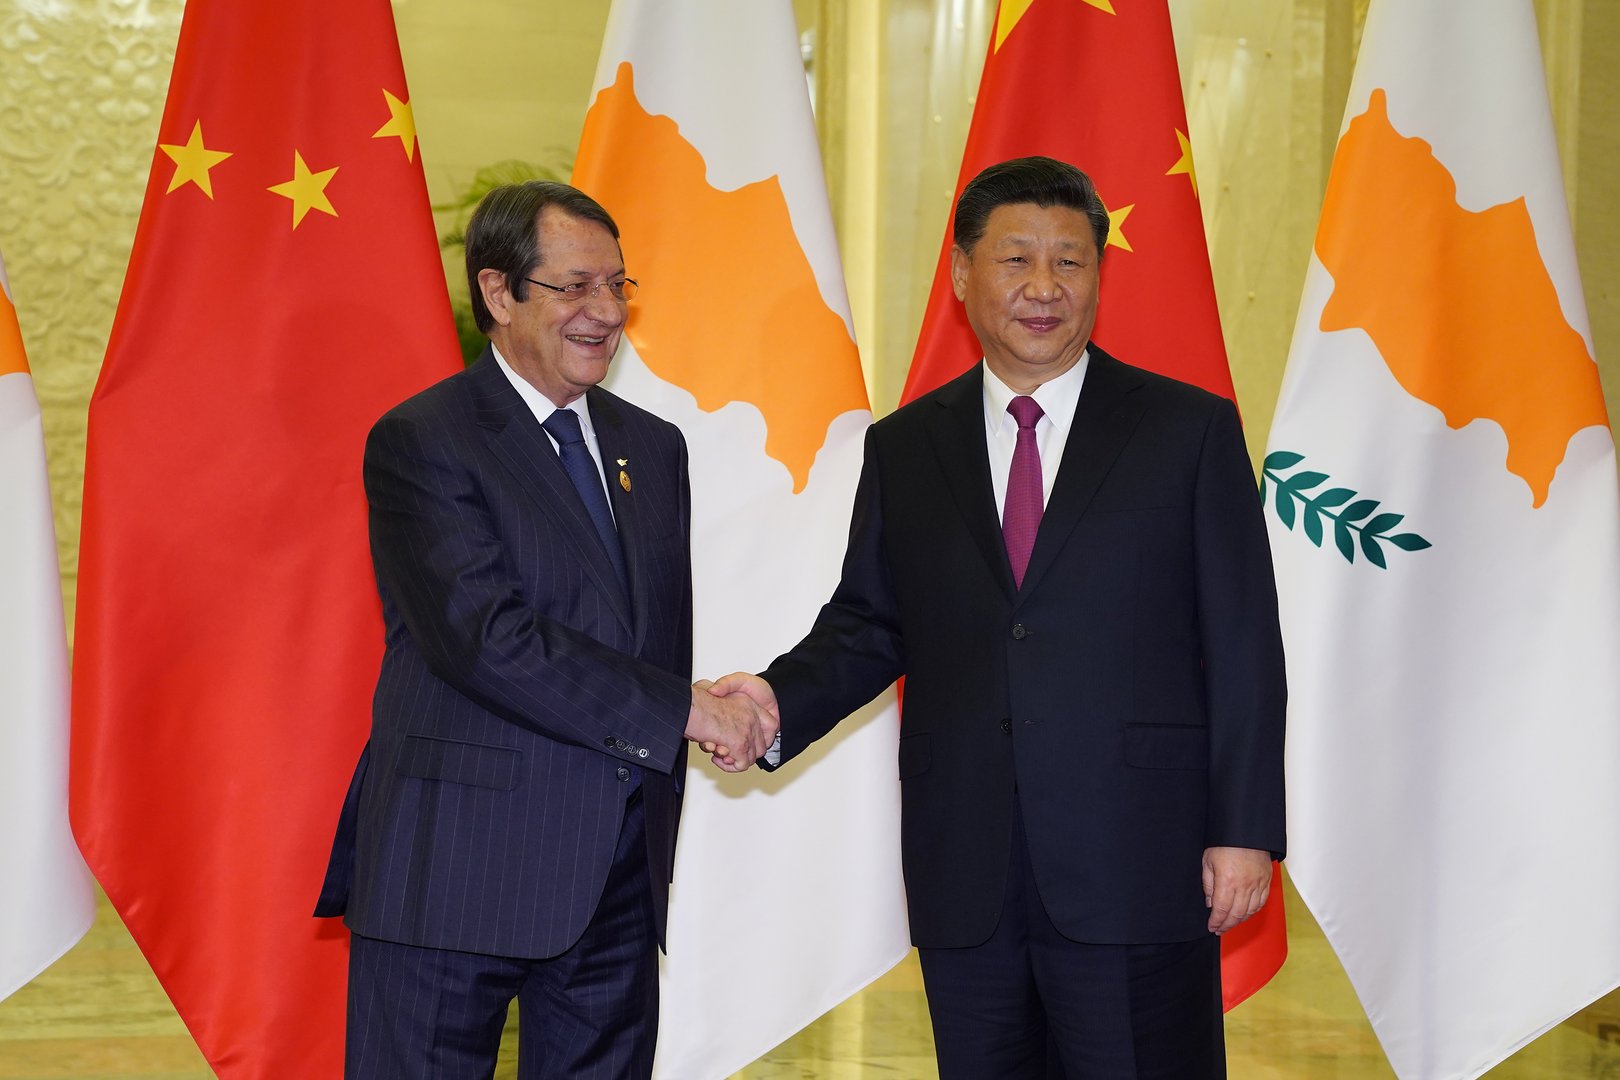 image EU clash looms over China’s role in Cyprus